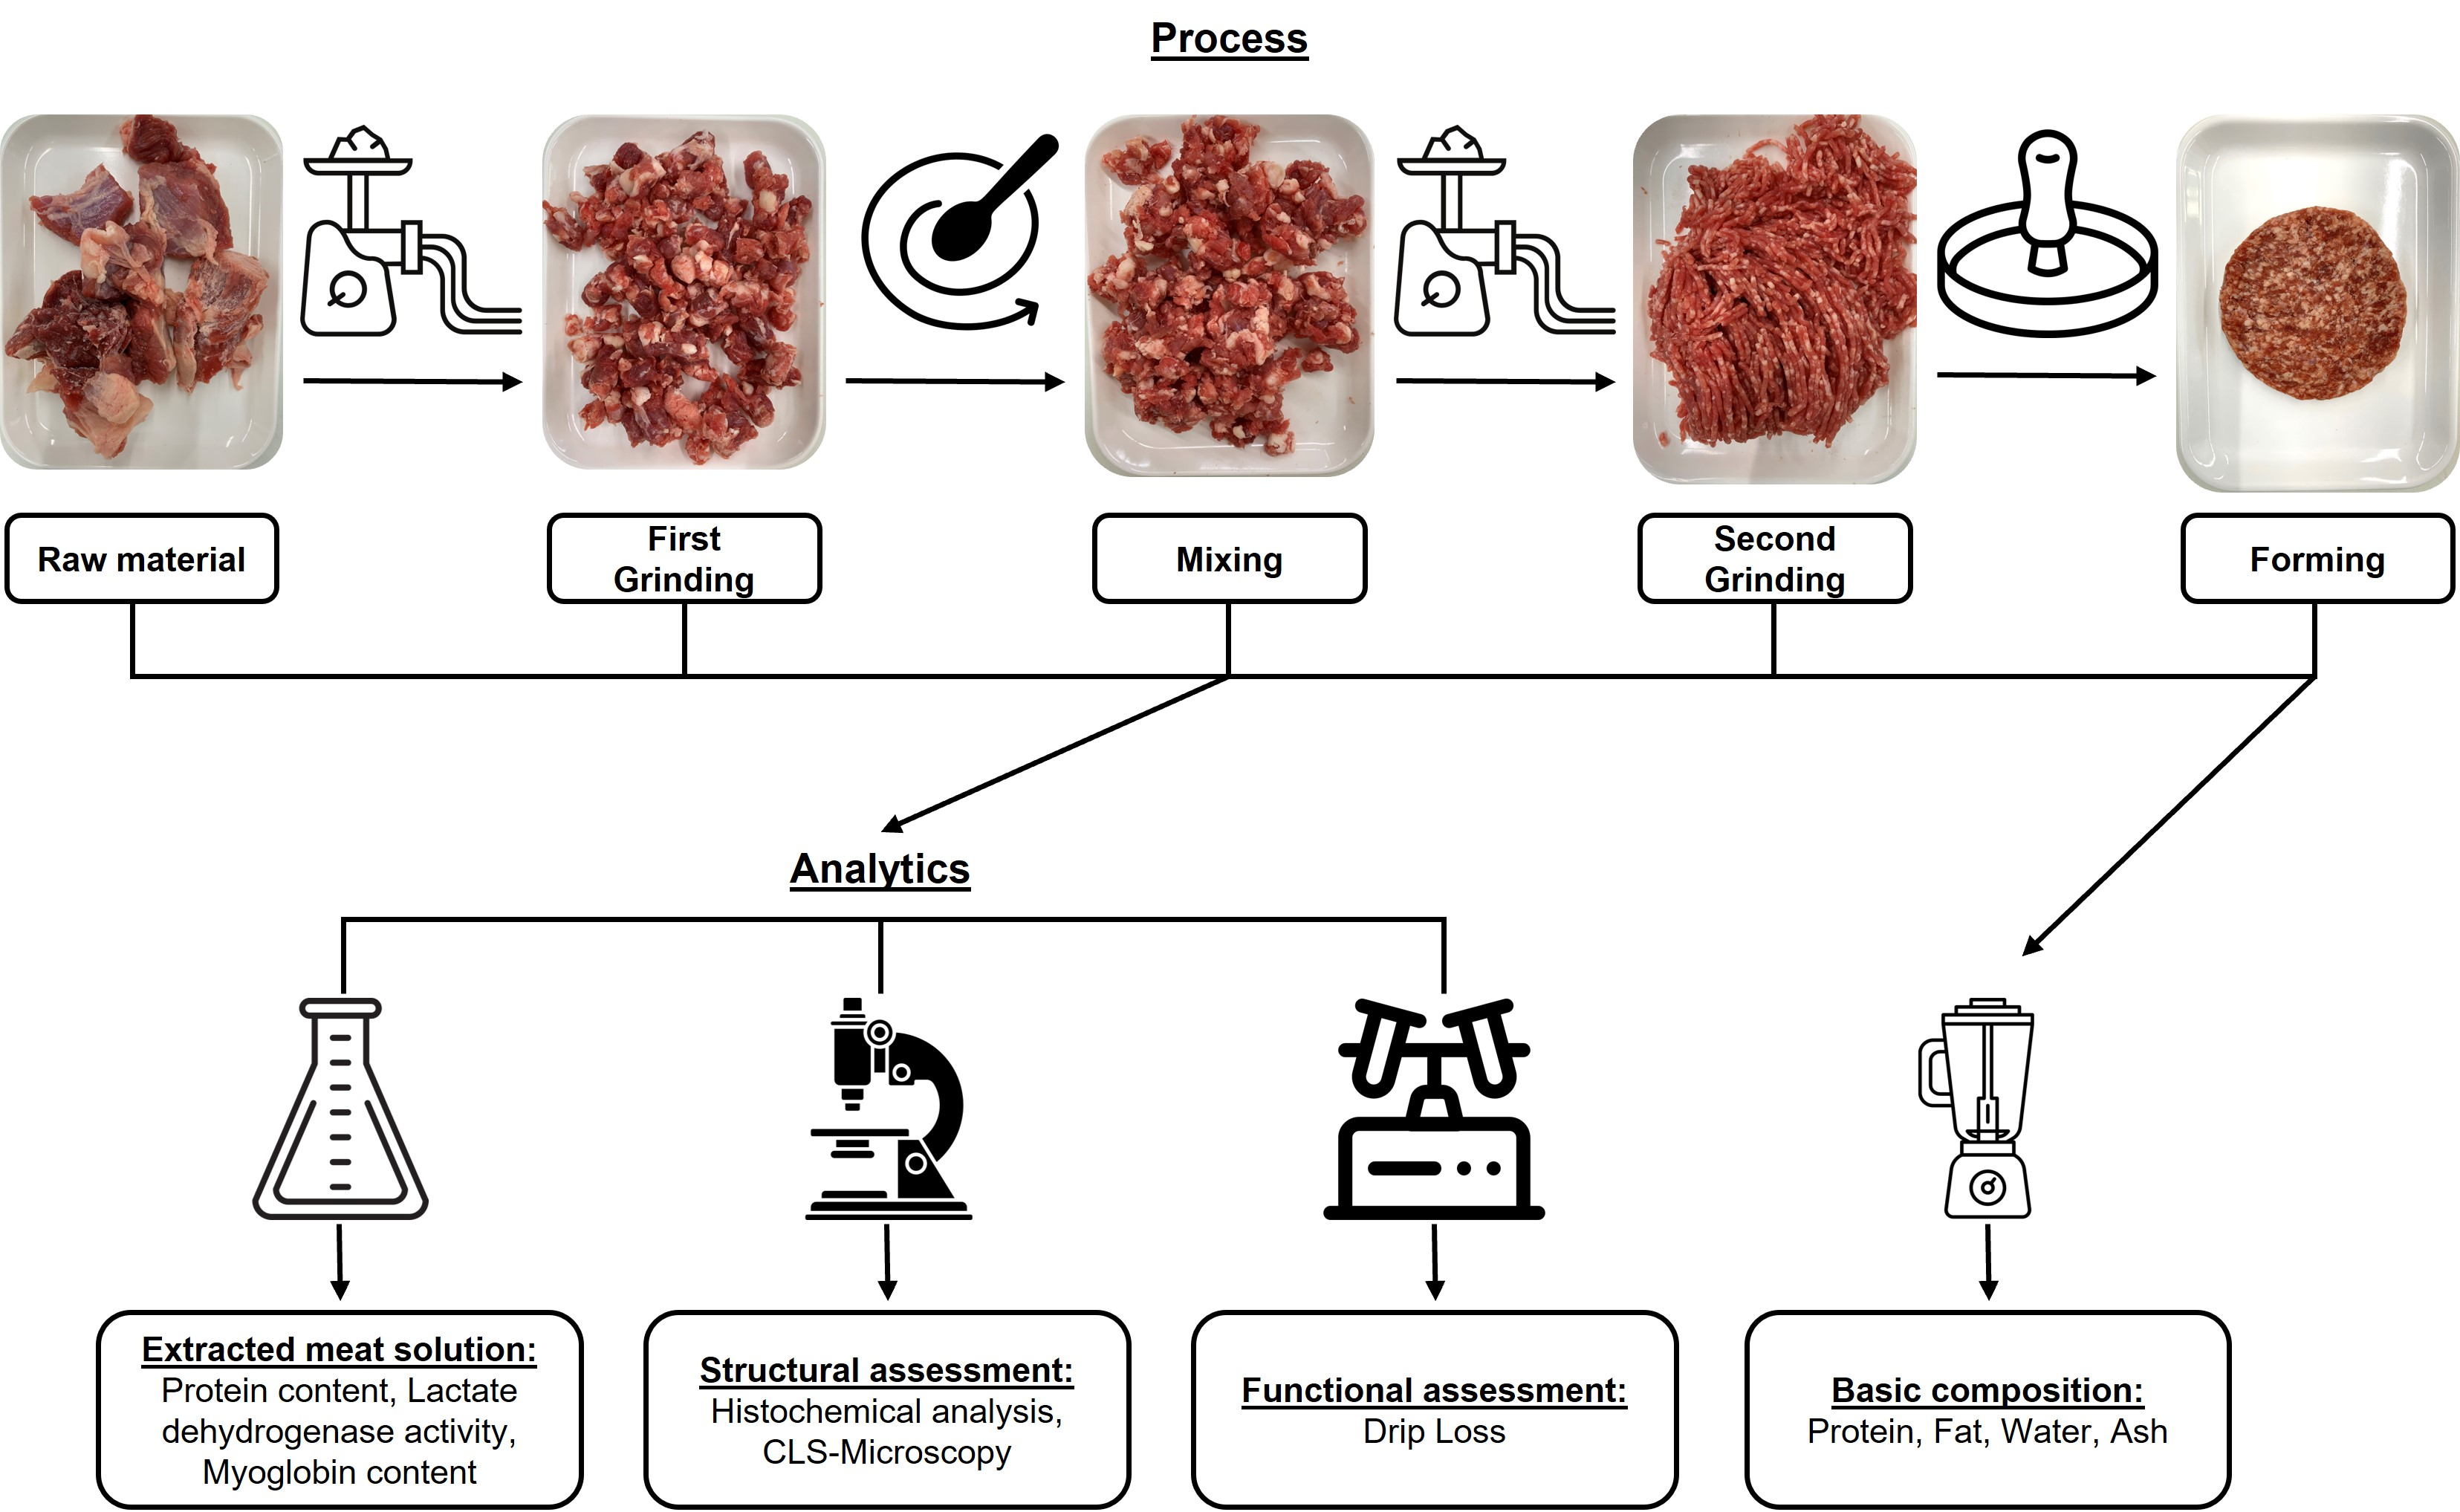 Applied Sciences | Free Full-Text | Influence of Processing Steps on  Structural, Functional, and Quality Properties of Beef Hamburgers | HTML